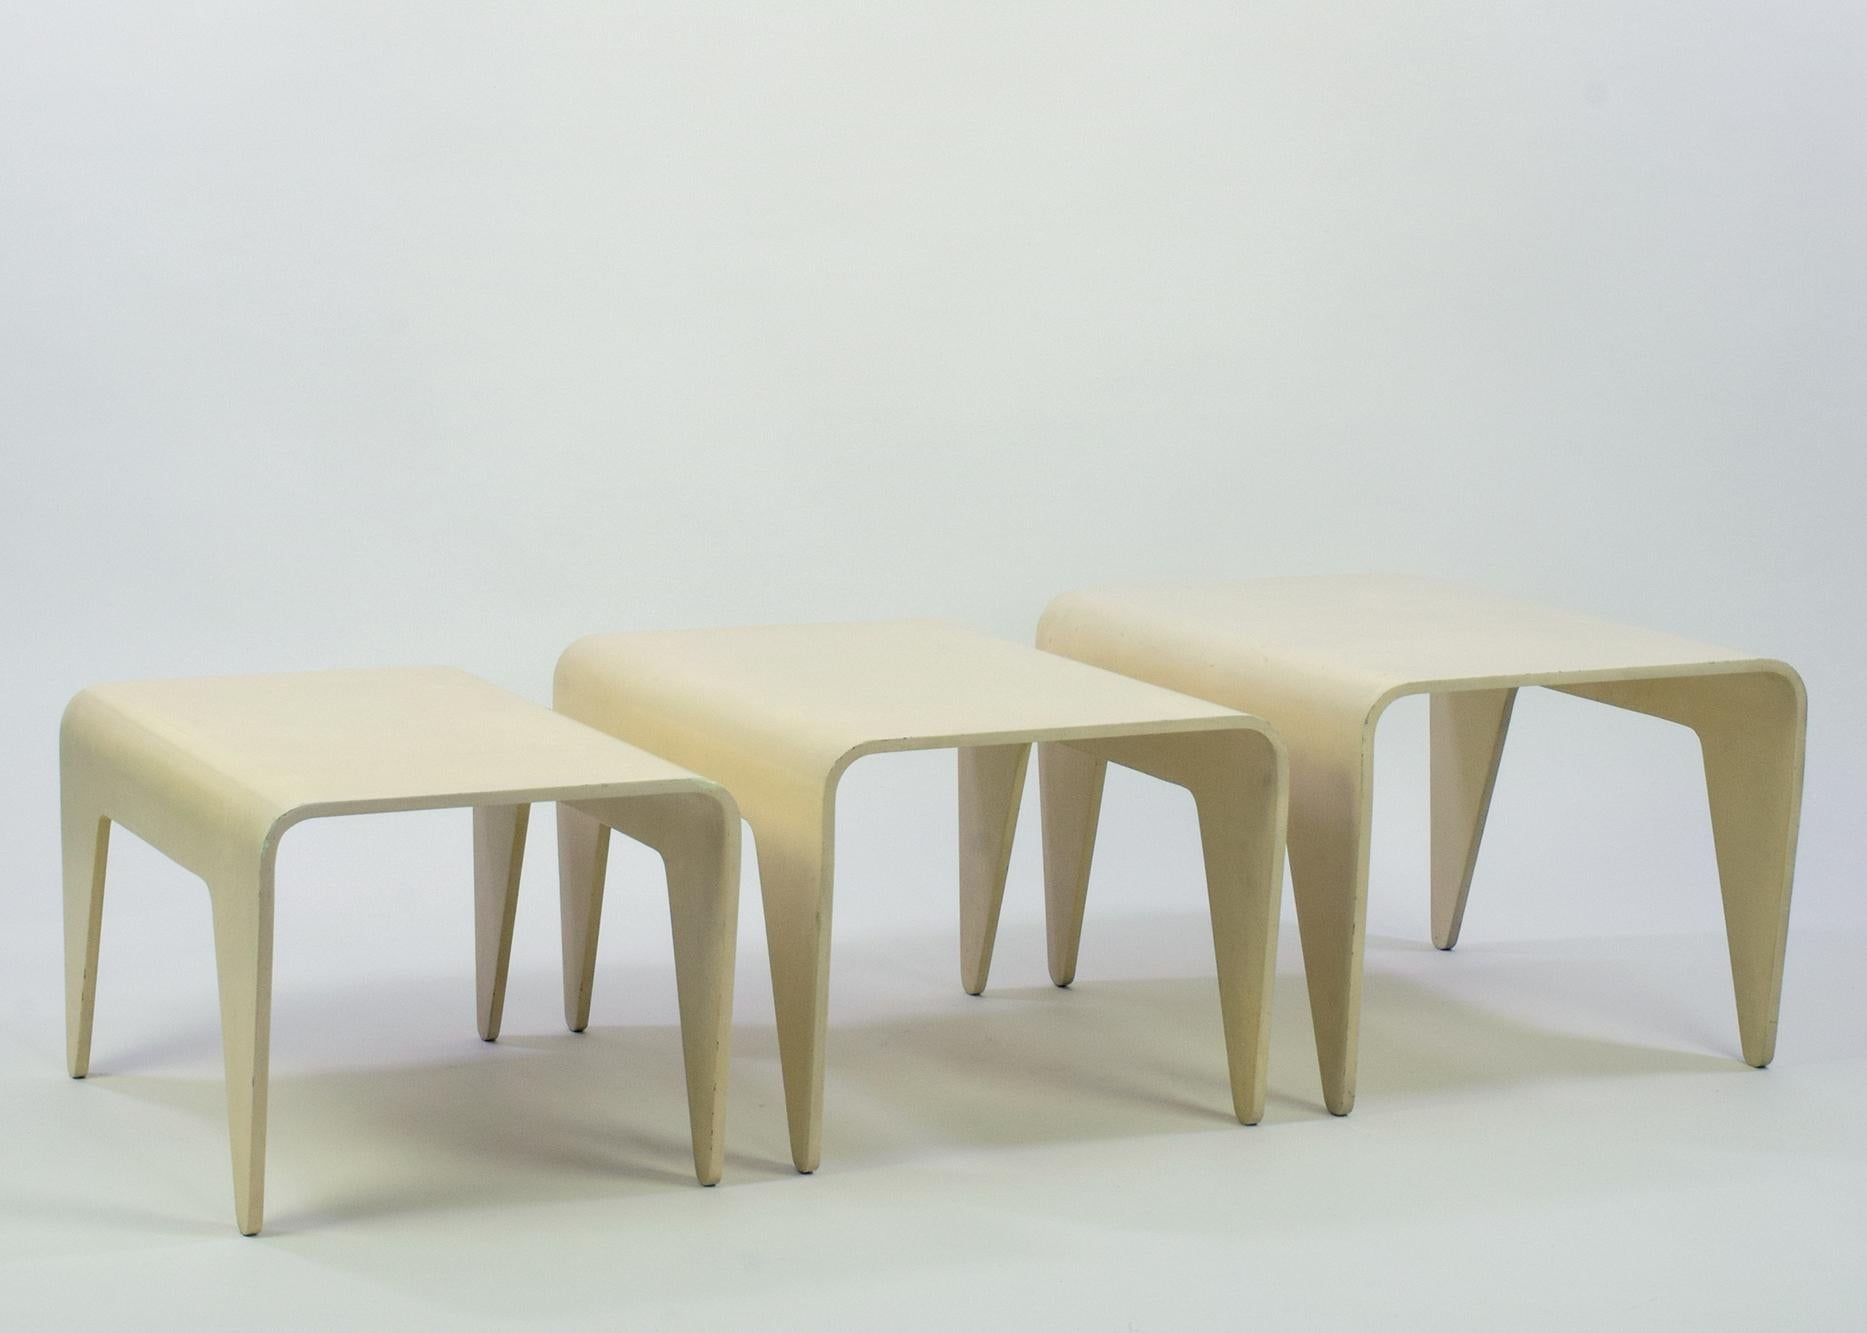 Painted Marcel Breuer, 'Isokon Nesting Tables, ' Set of Three Tables, for Isokon, 1936